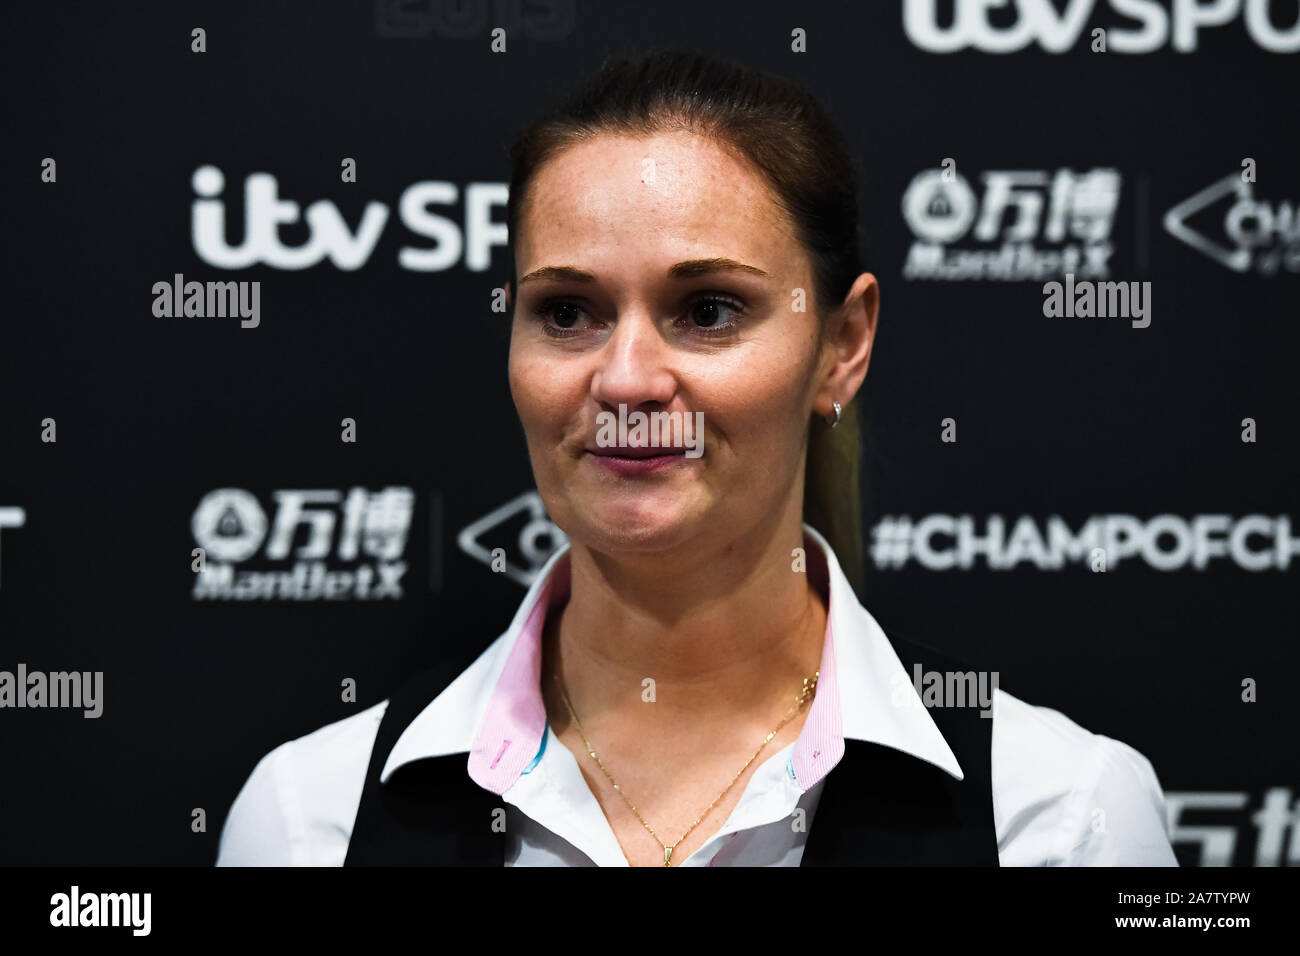 COVENTRY, UNITED KINGDOM. 04th Nov, 2019. Reanne Evans was interviewed  after Shaun Murphy vs Reanne Evans during Day 1 Semi-Finals of 2019 ManBetx  Champion of Champions at Ricoh Arena on Monday, November